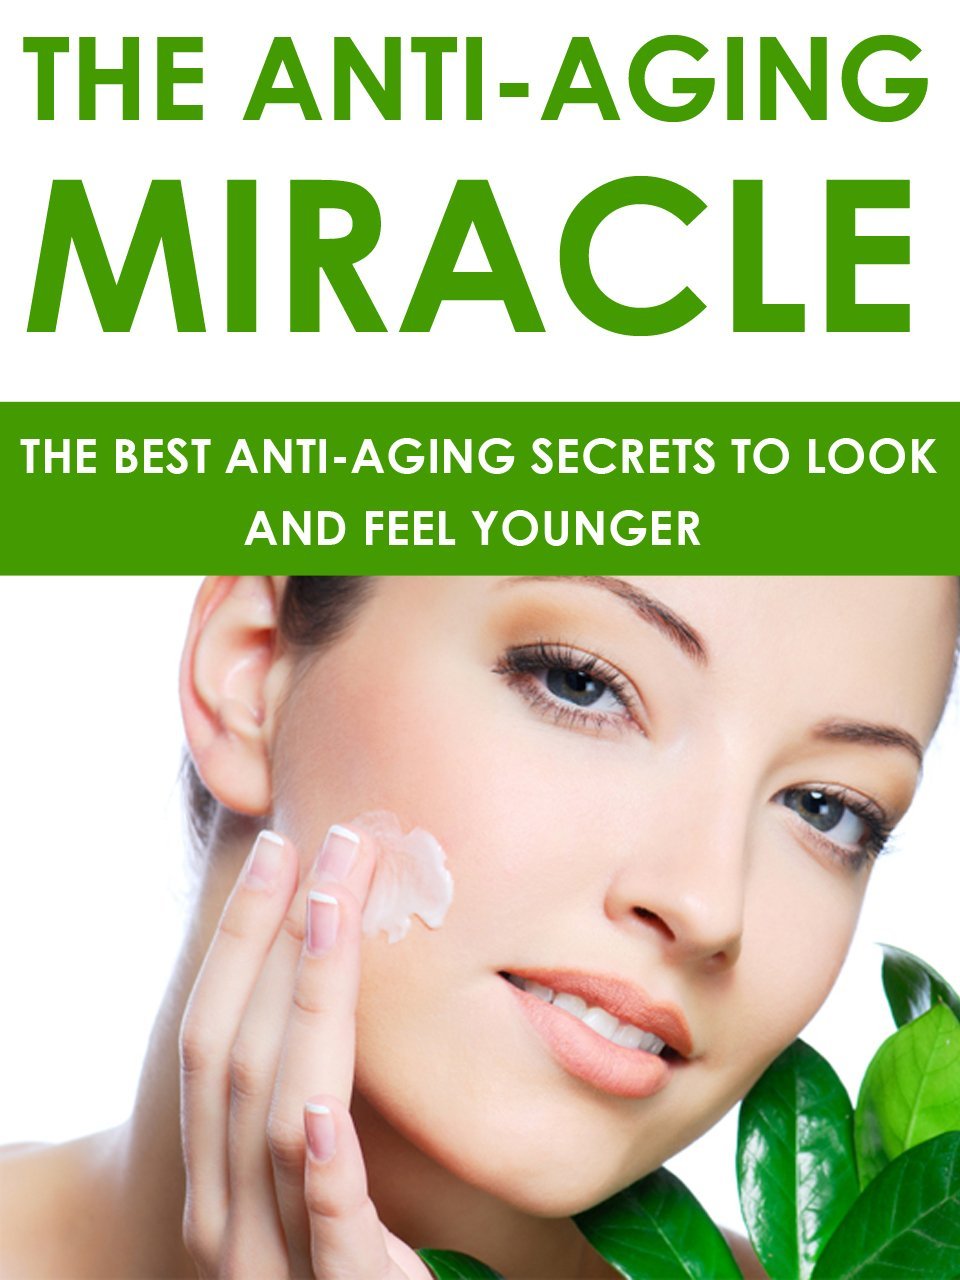 The Anti-Aging Miracle: The Best Anti-Aging Secrets To Look and Feel Younger by “Life-Changing eBooks”